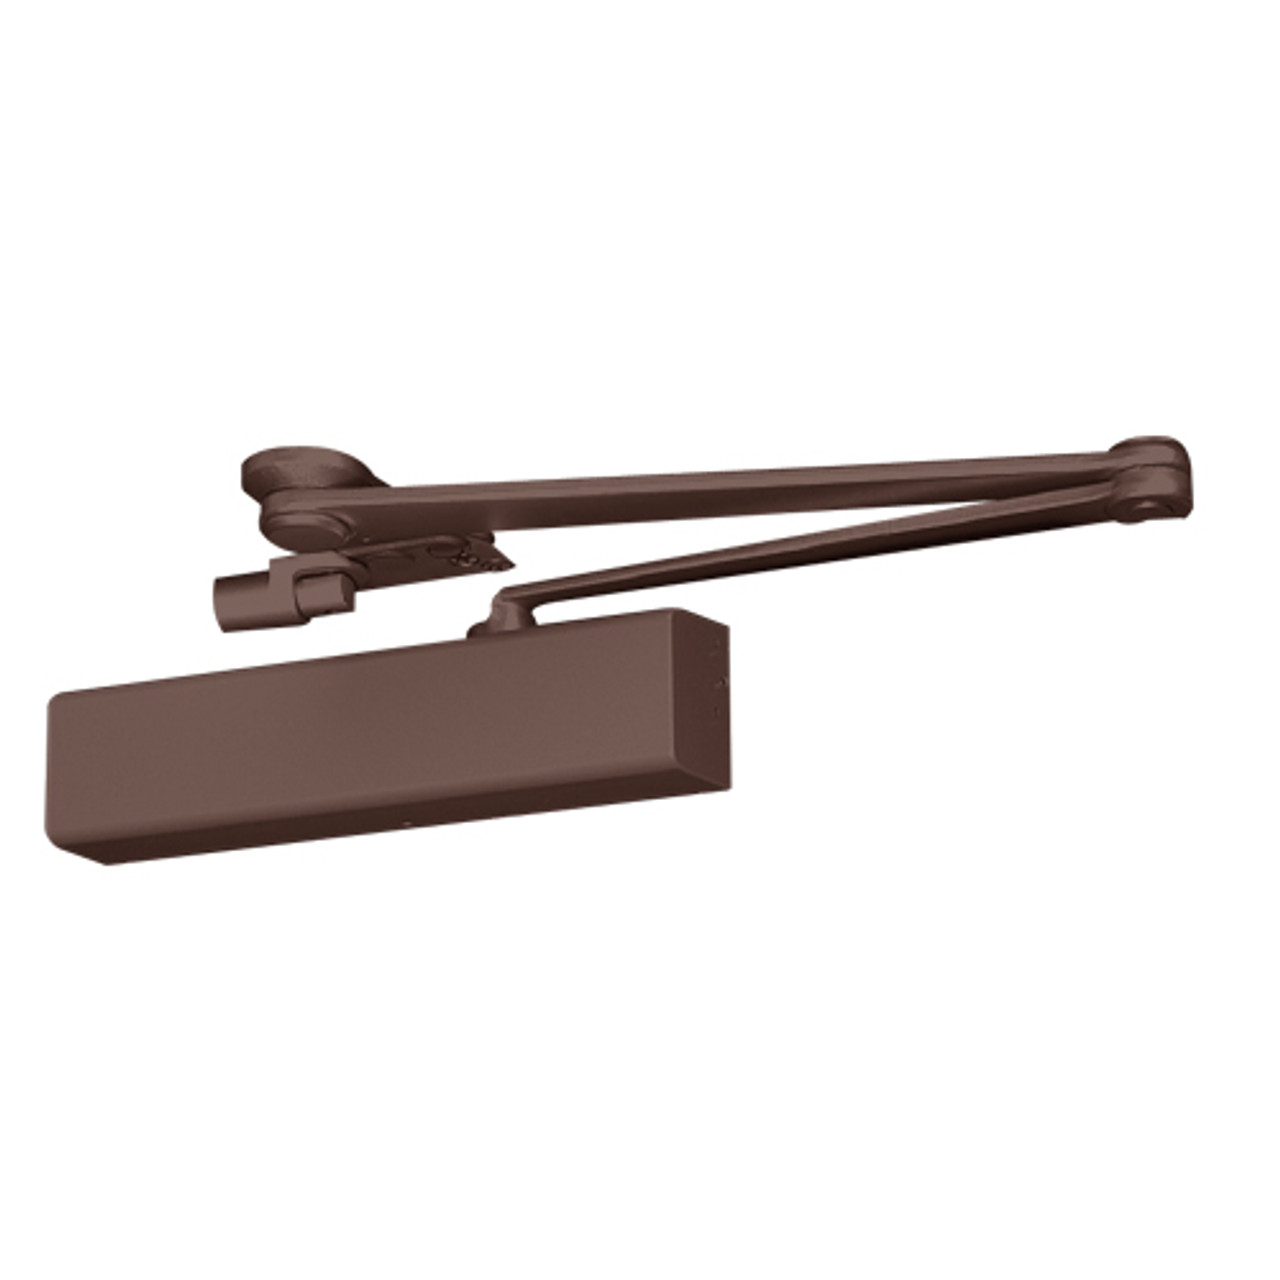 CPS8501TM-690 Norton 8000 Series Full Cover Hold Open Door Closers with CloserPlus Spring Arm in Statuary Bronze Finish